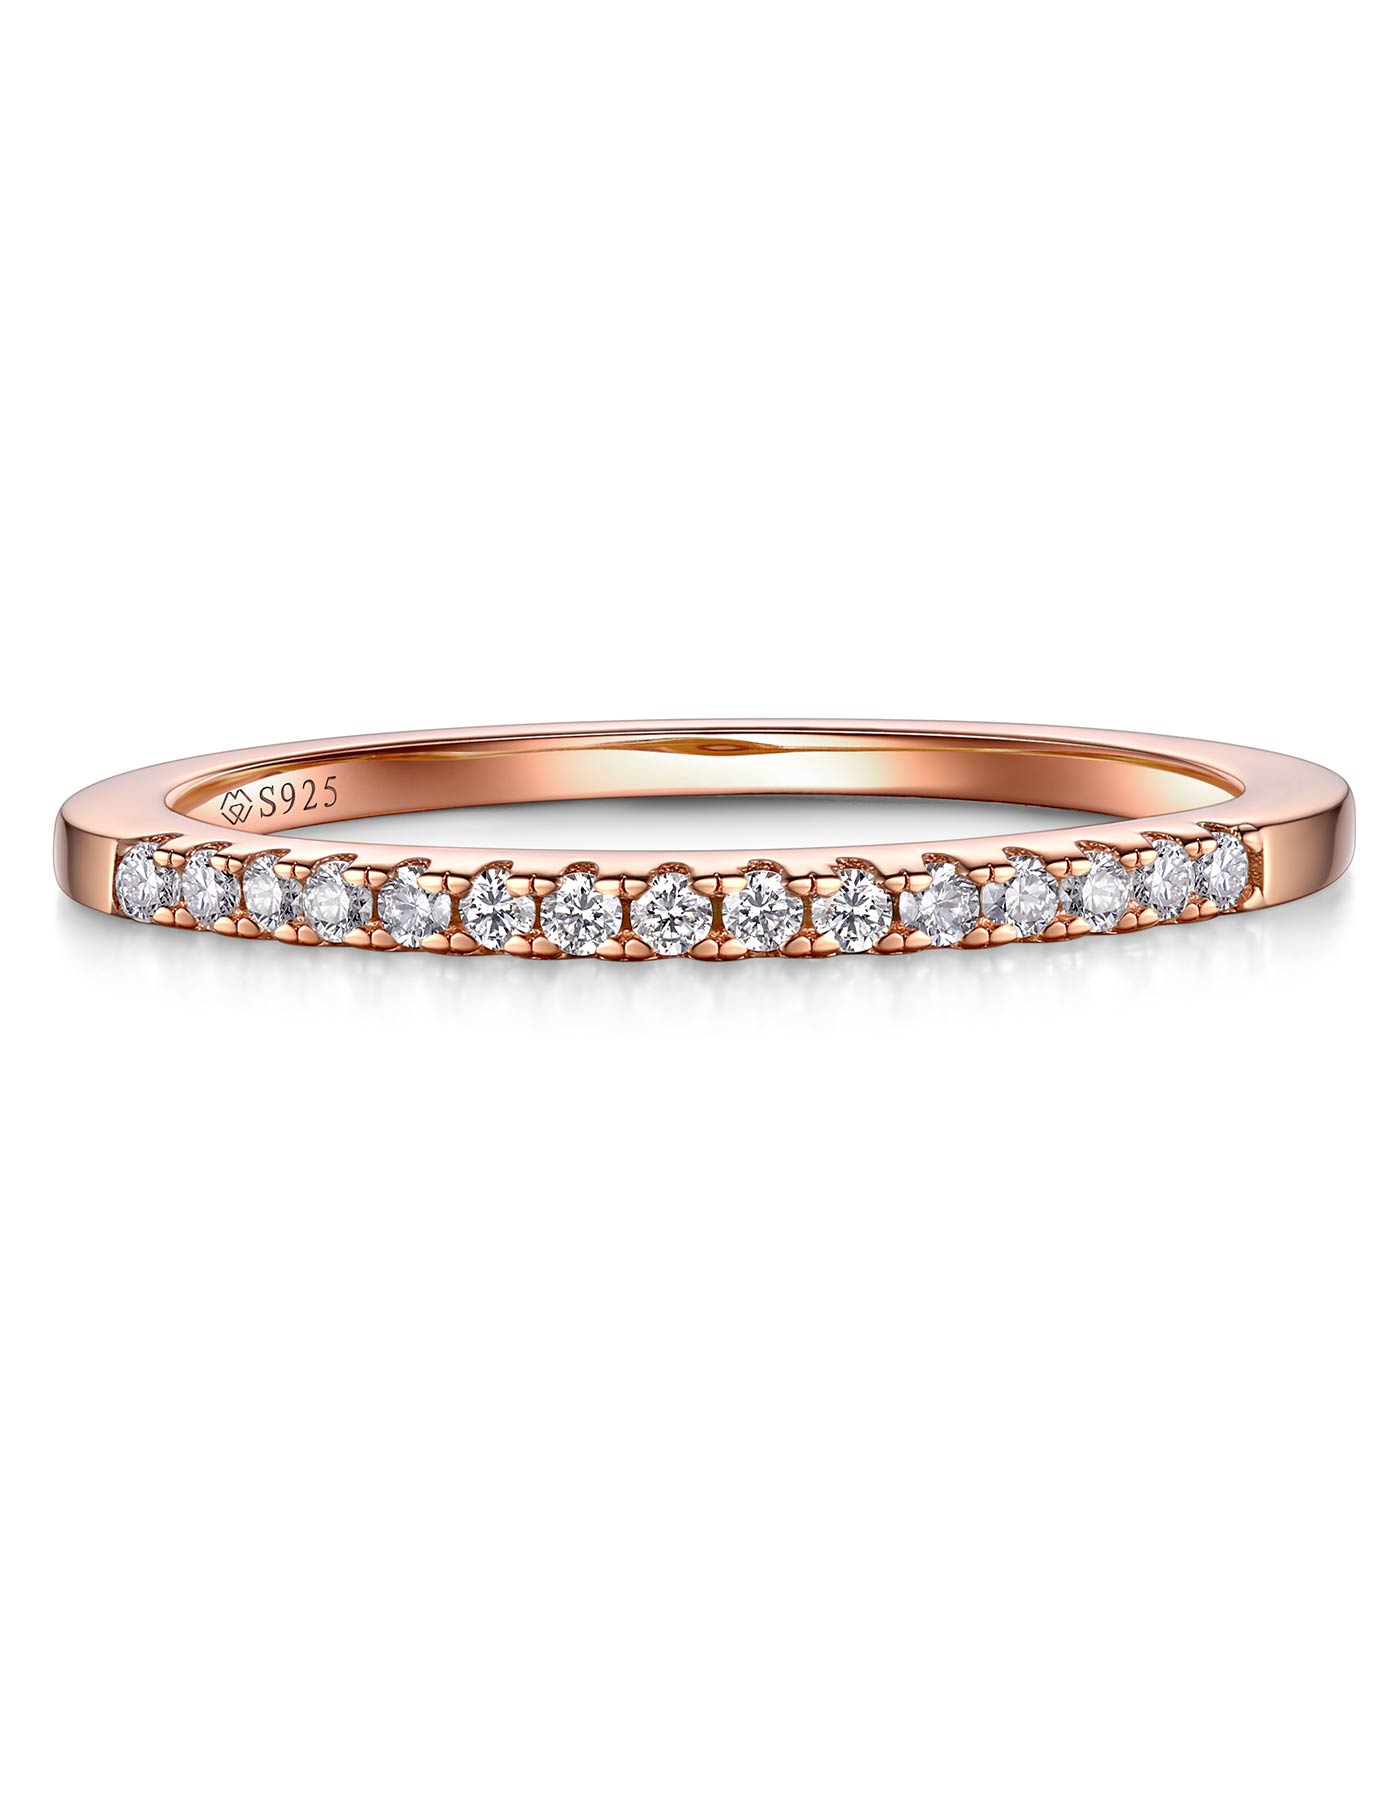 MomentWish 925 Sterling Silver Moissanite Wedding Band Ring Rose Gold